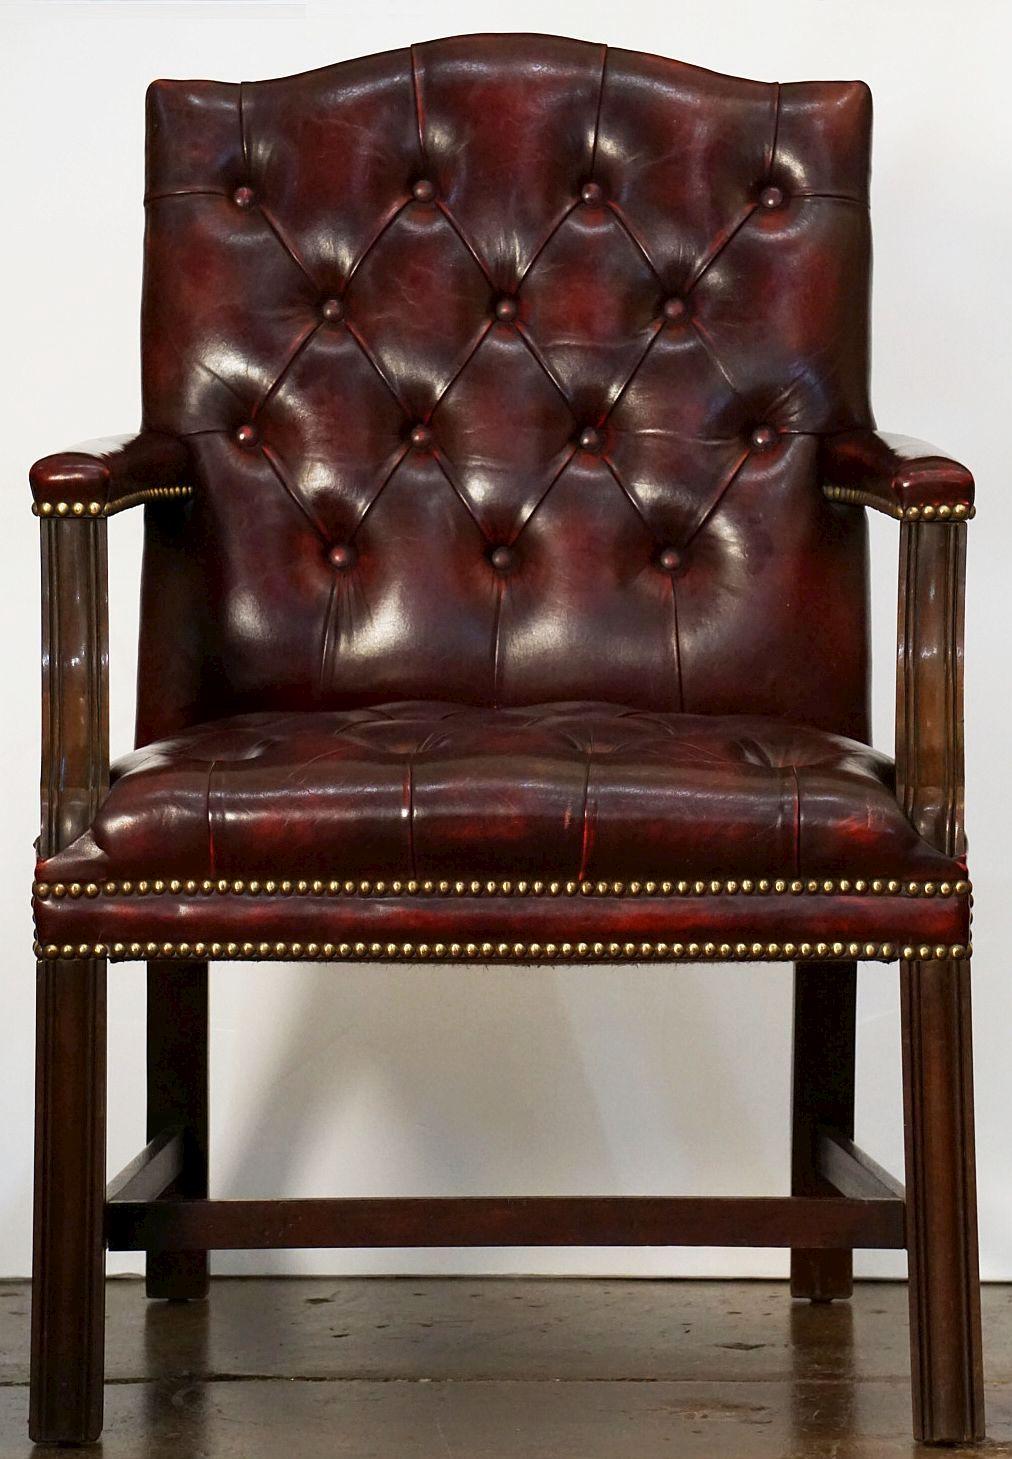 A large, comfortable English armchair or library lounge chair in the Chippendale style, featuring a tufted cordovan leather back, seat, and arms, with brass nail-head trim. Set upon a stretcher frame of turned wood.